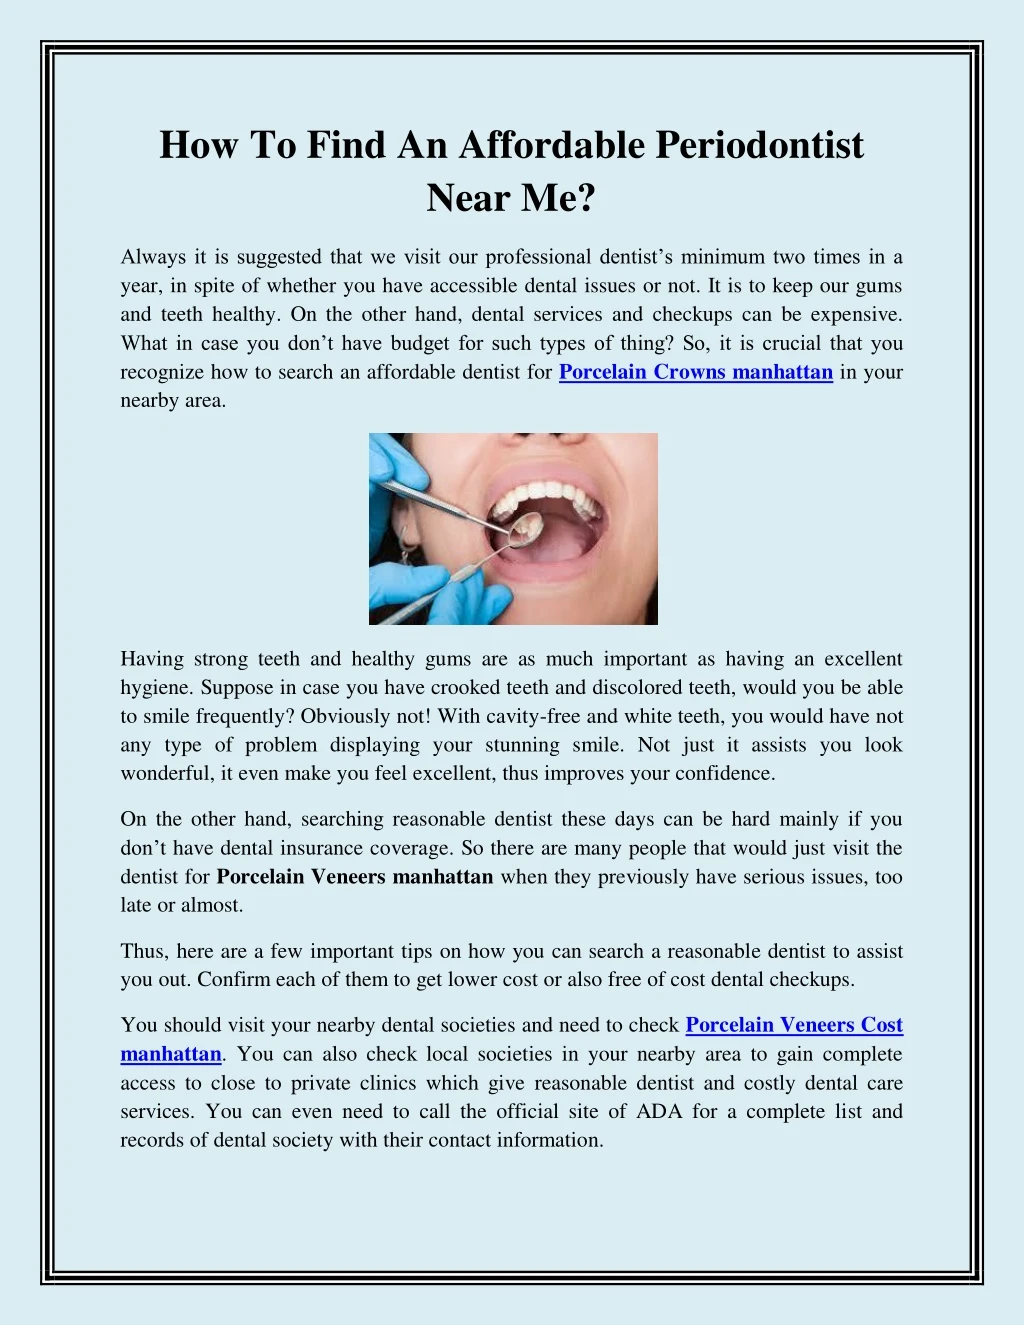 how to find an affordable periodontist near me